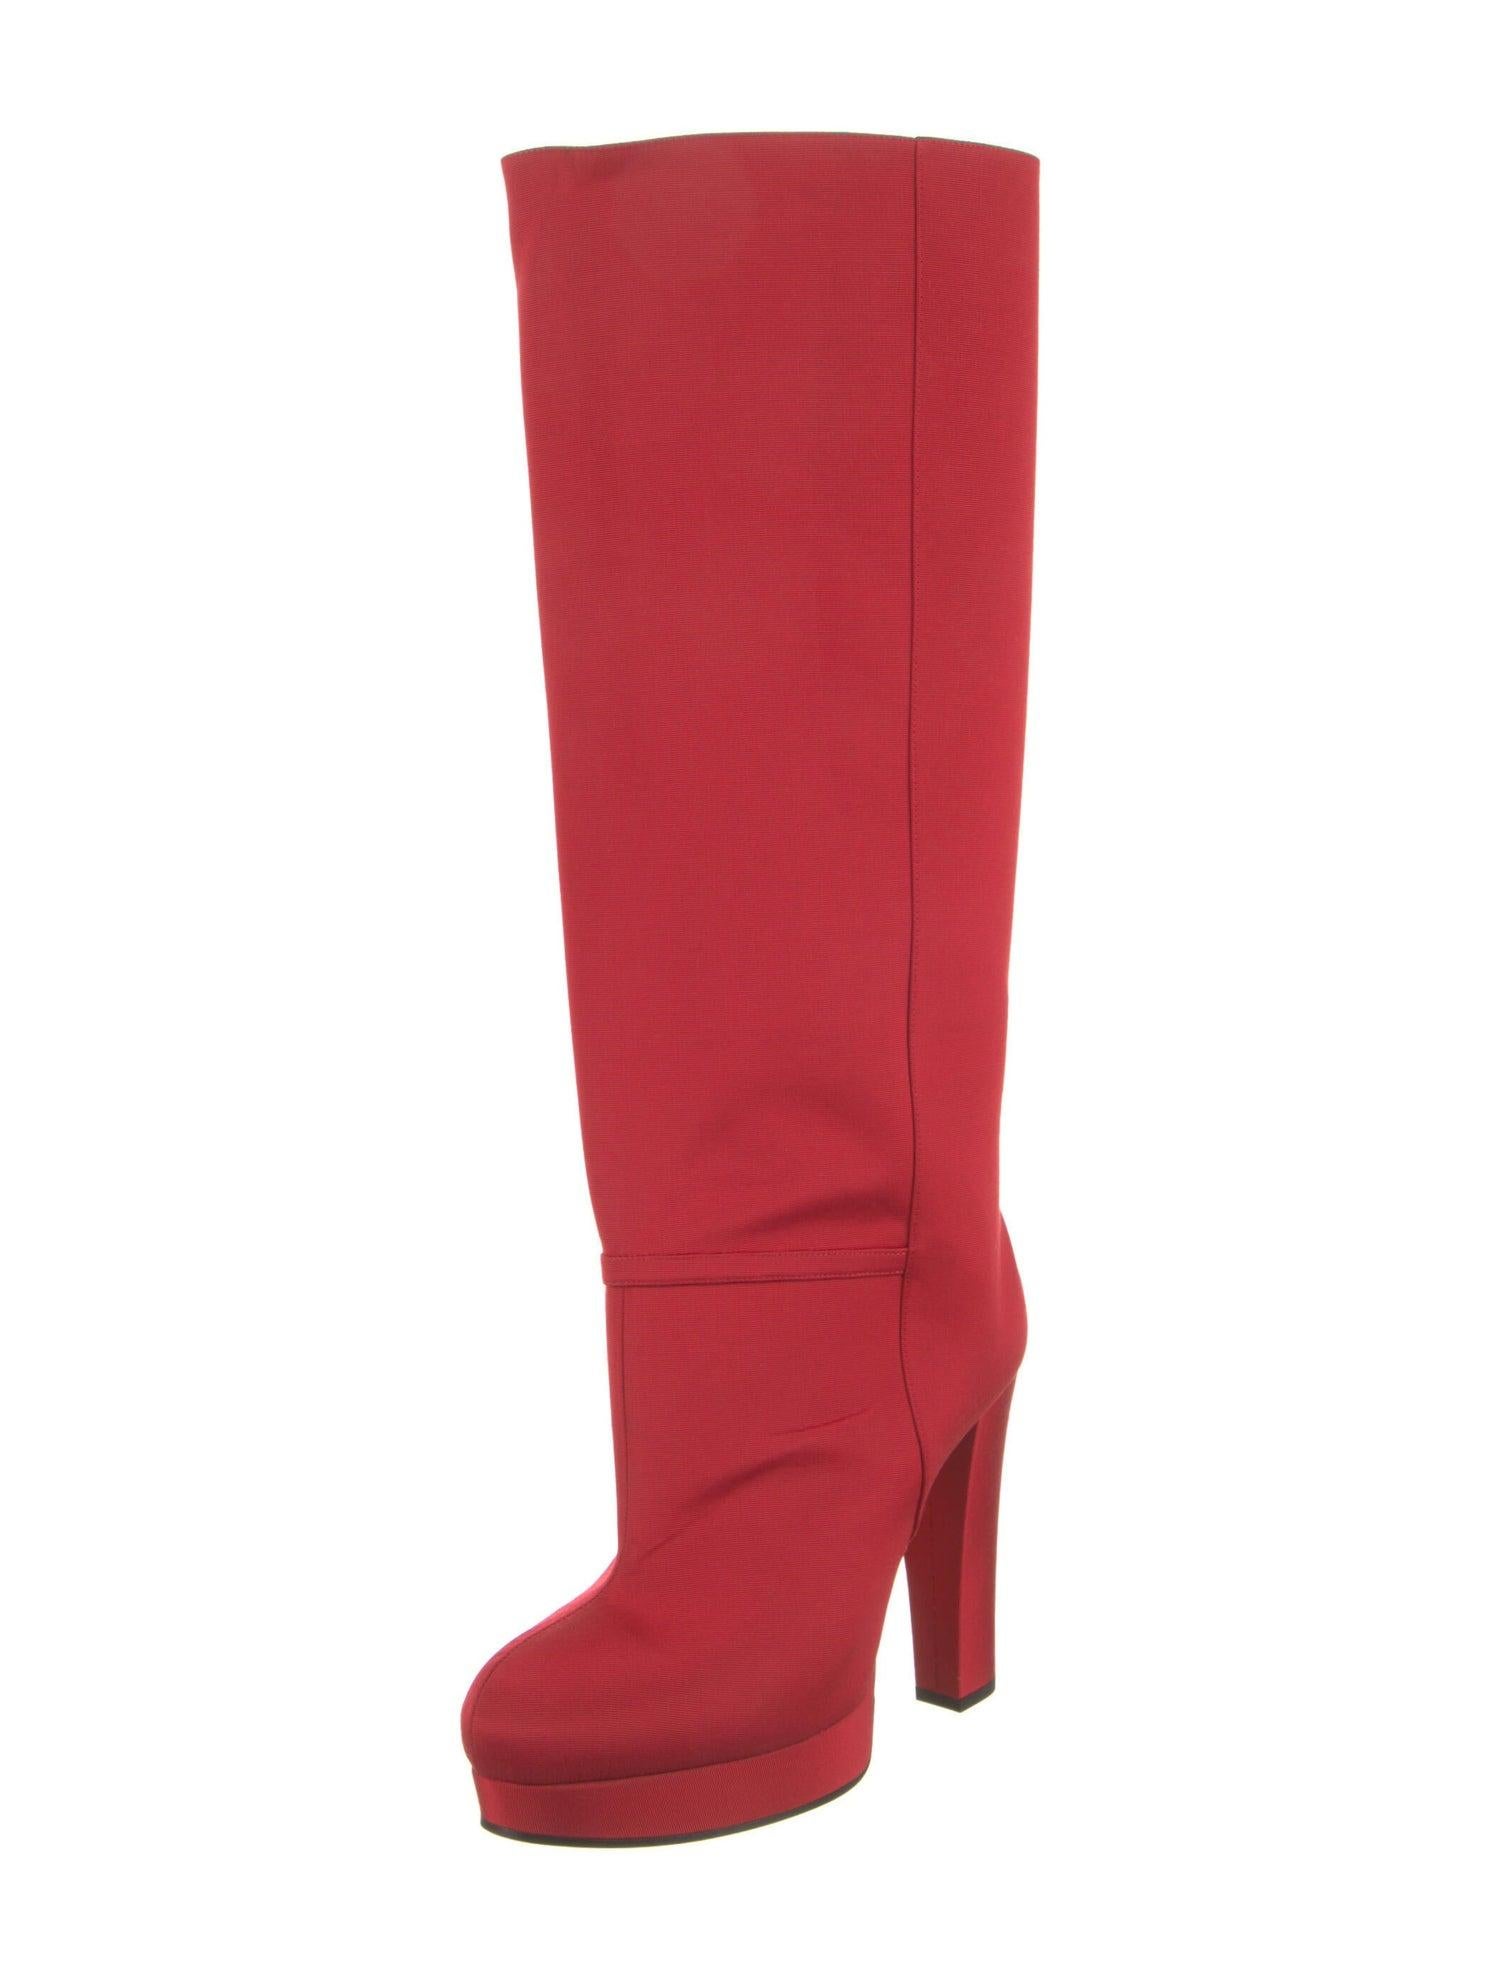 New With Box Gucci Fall 2019 Alessandro Michele Red Boots Sz 38 en vente 12